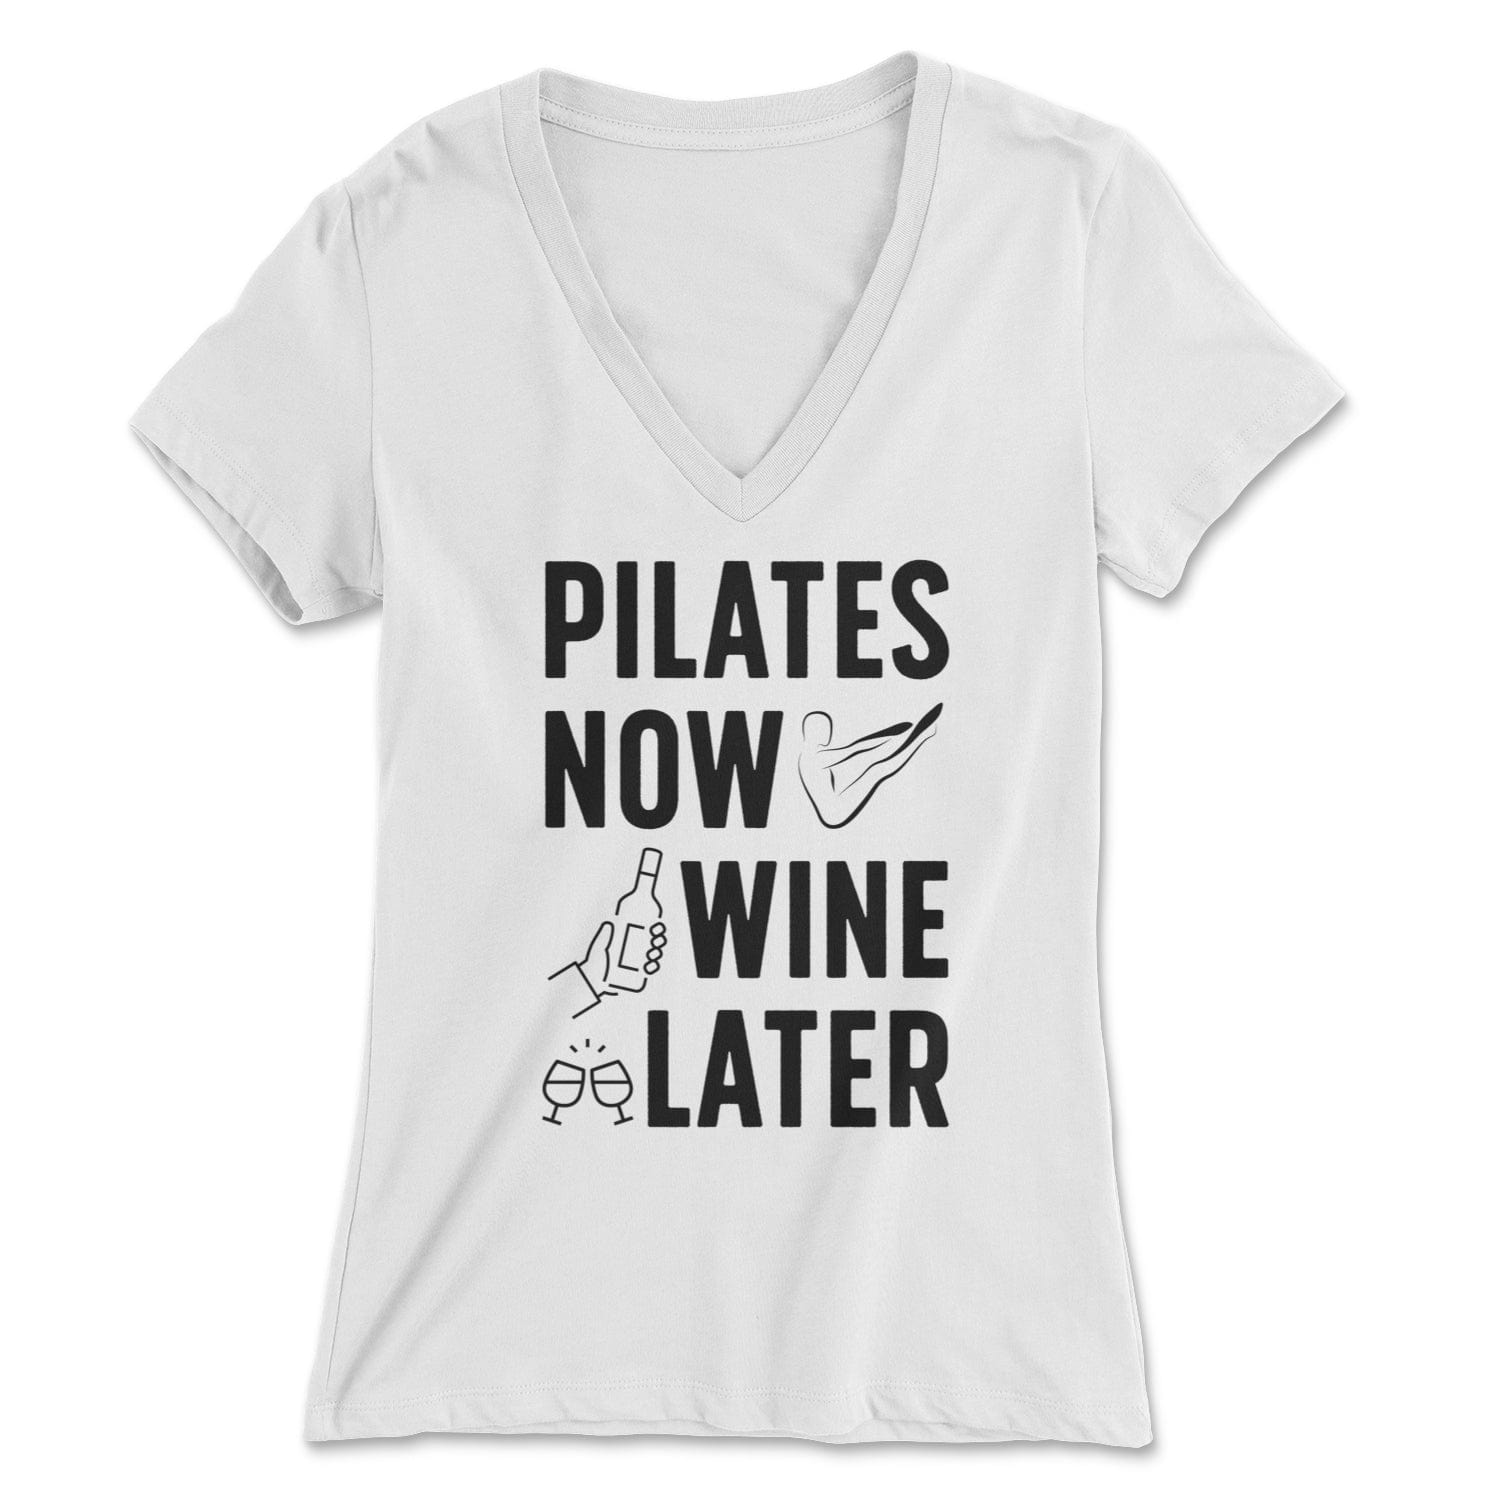 "Pilates Now Wine Later" - Women's V-Neck Tee Skyba Print Material